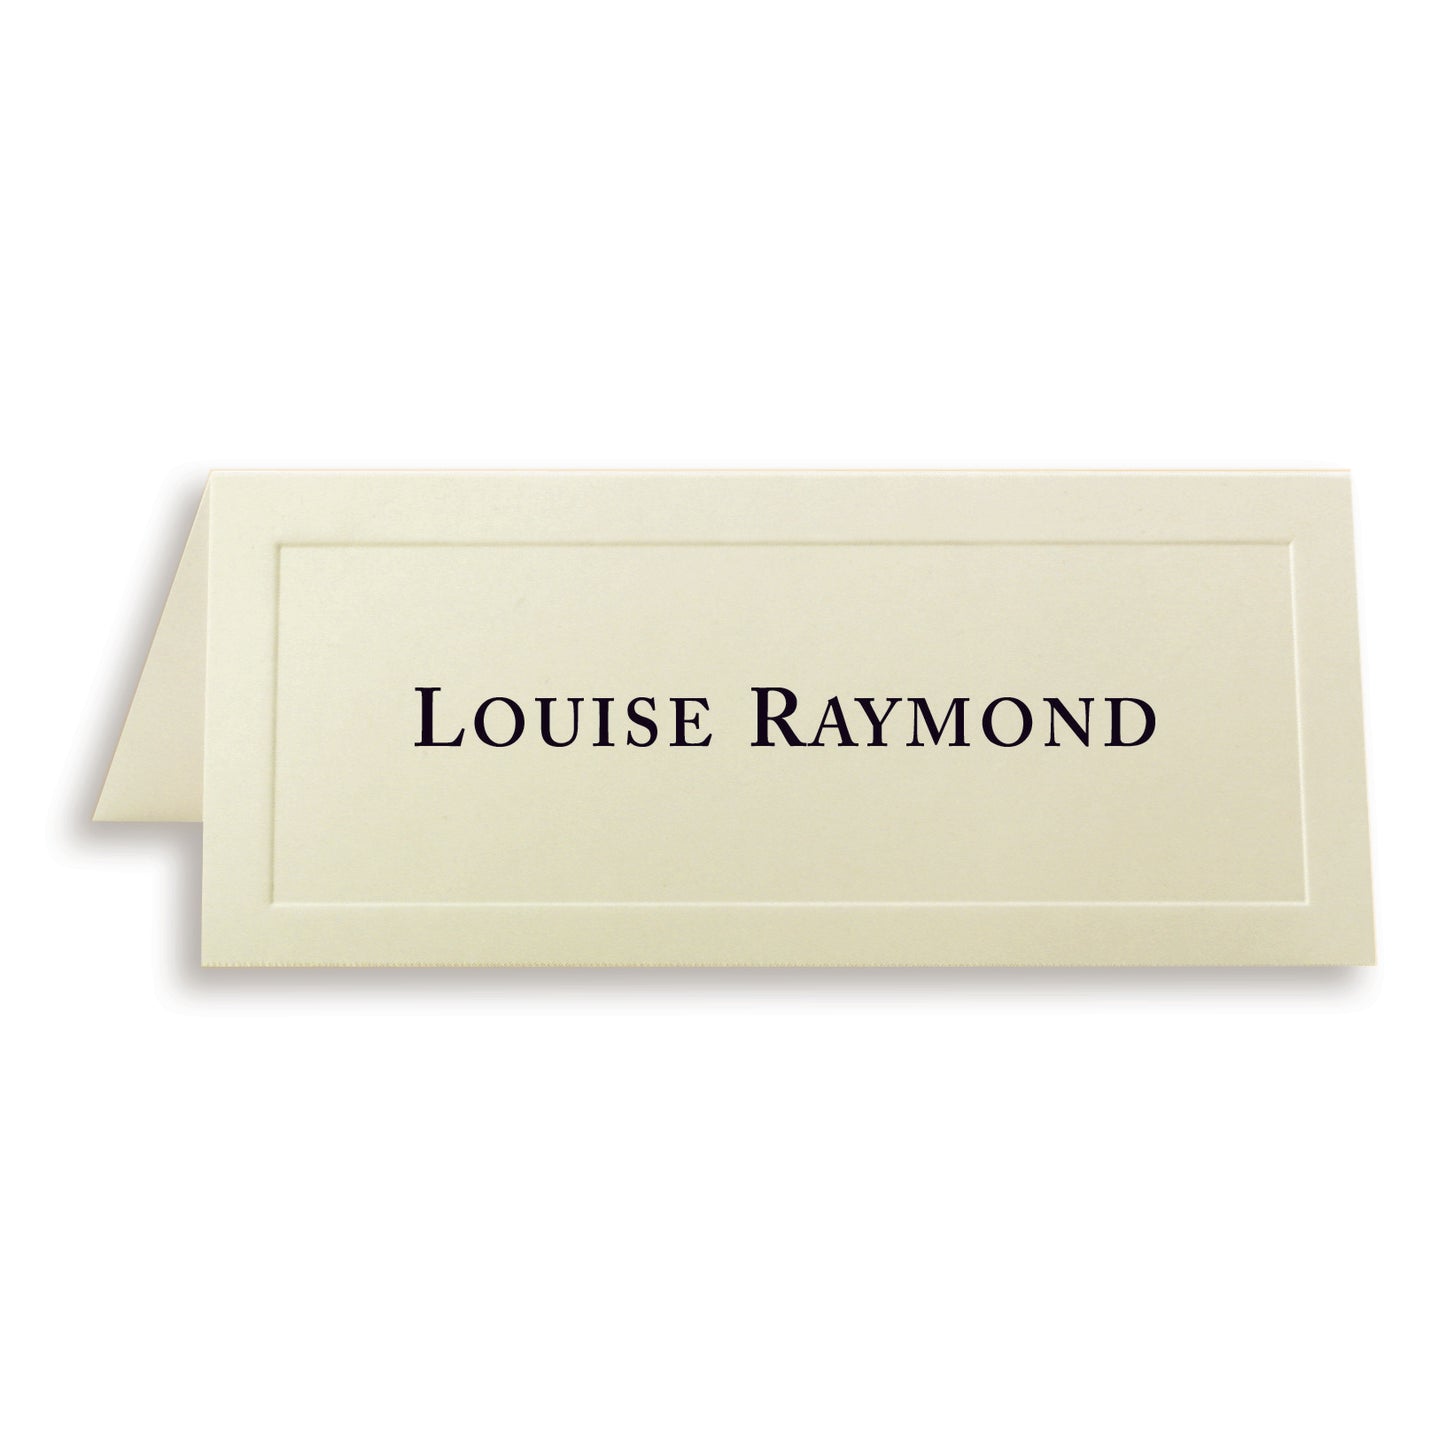 St. James® Overtures® Traditional Embossed Place Cards, Ivory, Pack of 60